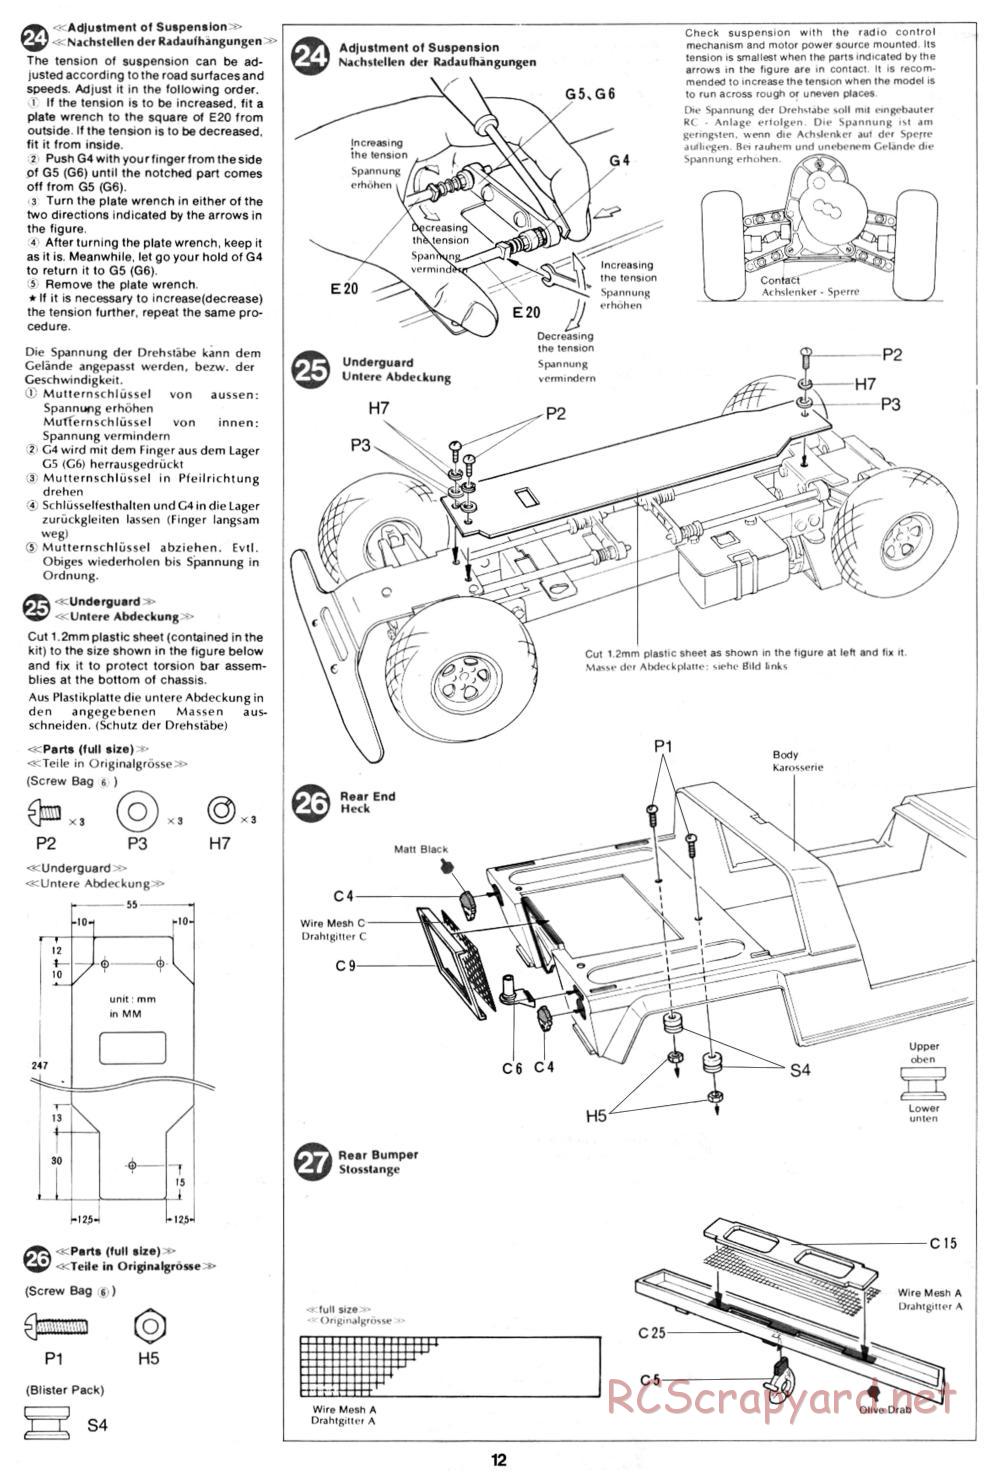 Tamiya - XR311 Combat Support Vehicle (1977) Chassis - Manual - Page 12